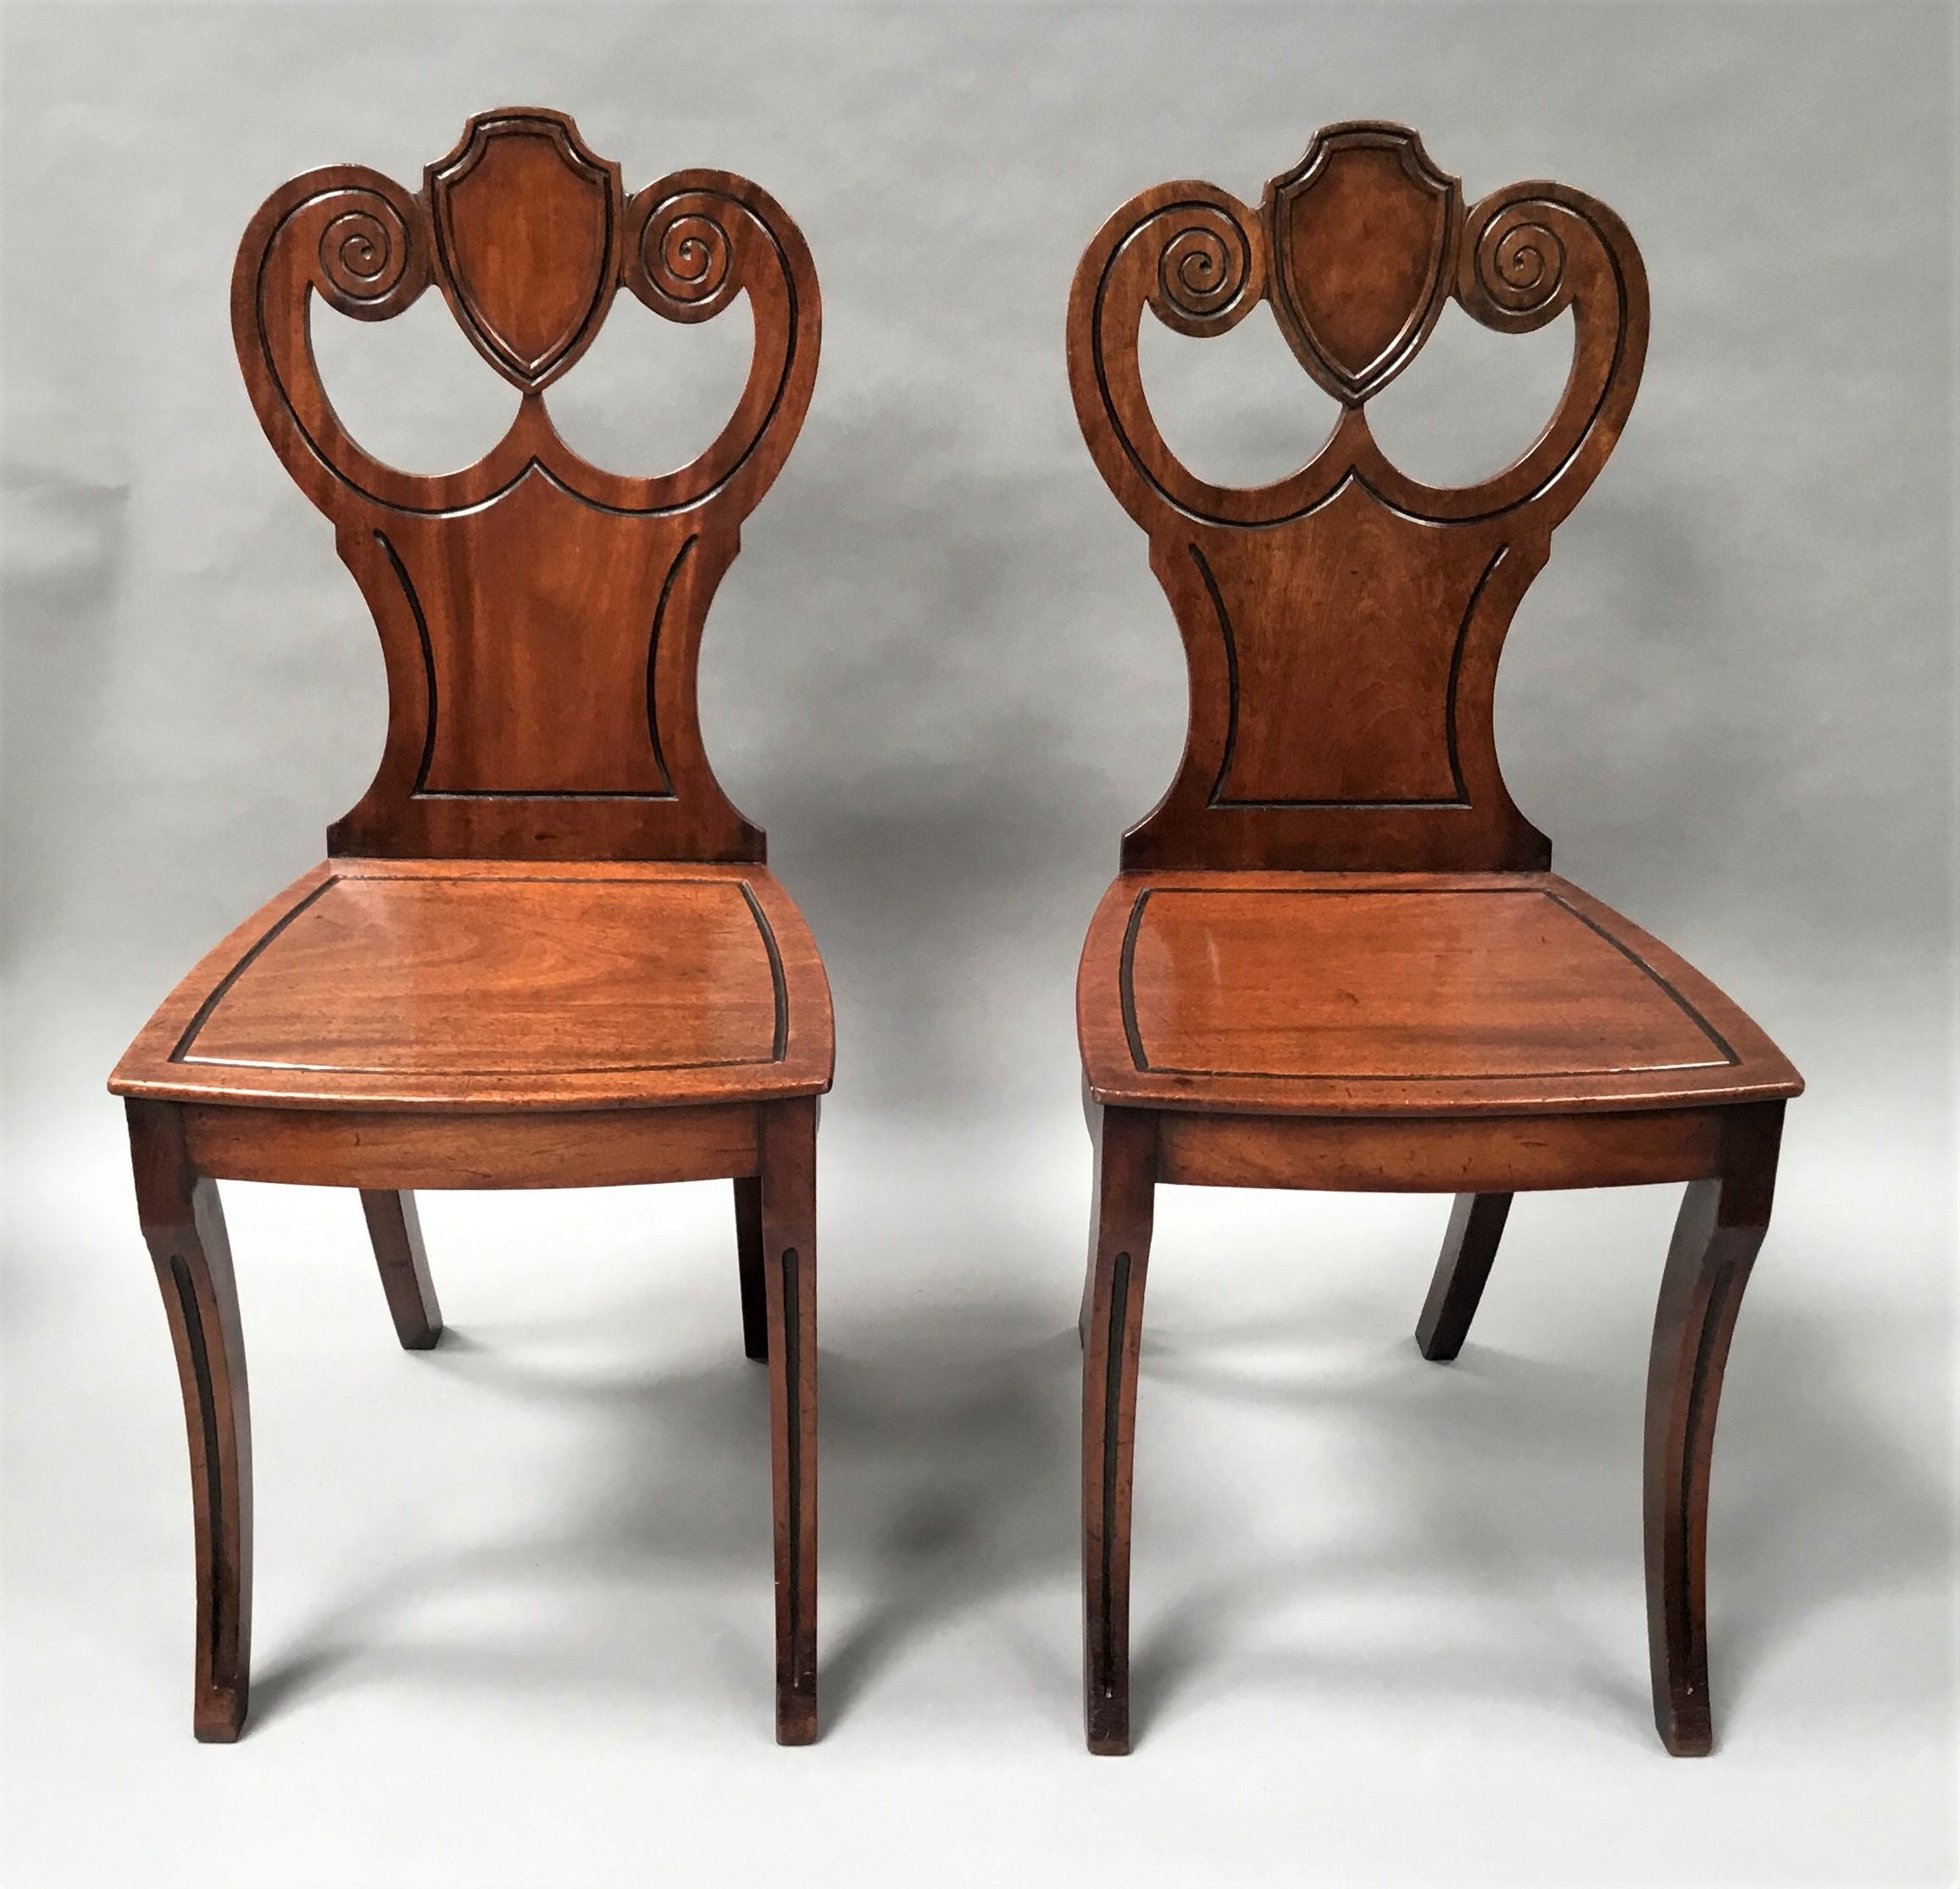 Good Regency pair of mahogany hall chairs of stylish design, the waisted shaped backs headed with a central shield flanked by open scrolls all with ebonised single fluted decoration in a scroll work design. The bow fronted shaped seats with the